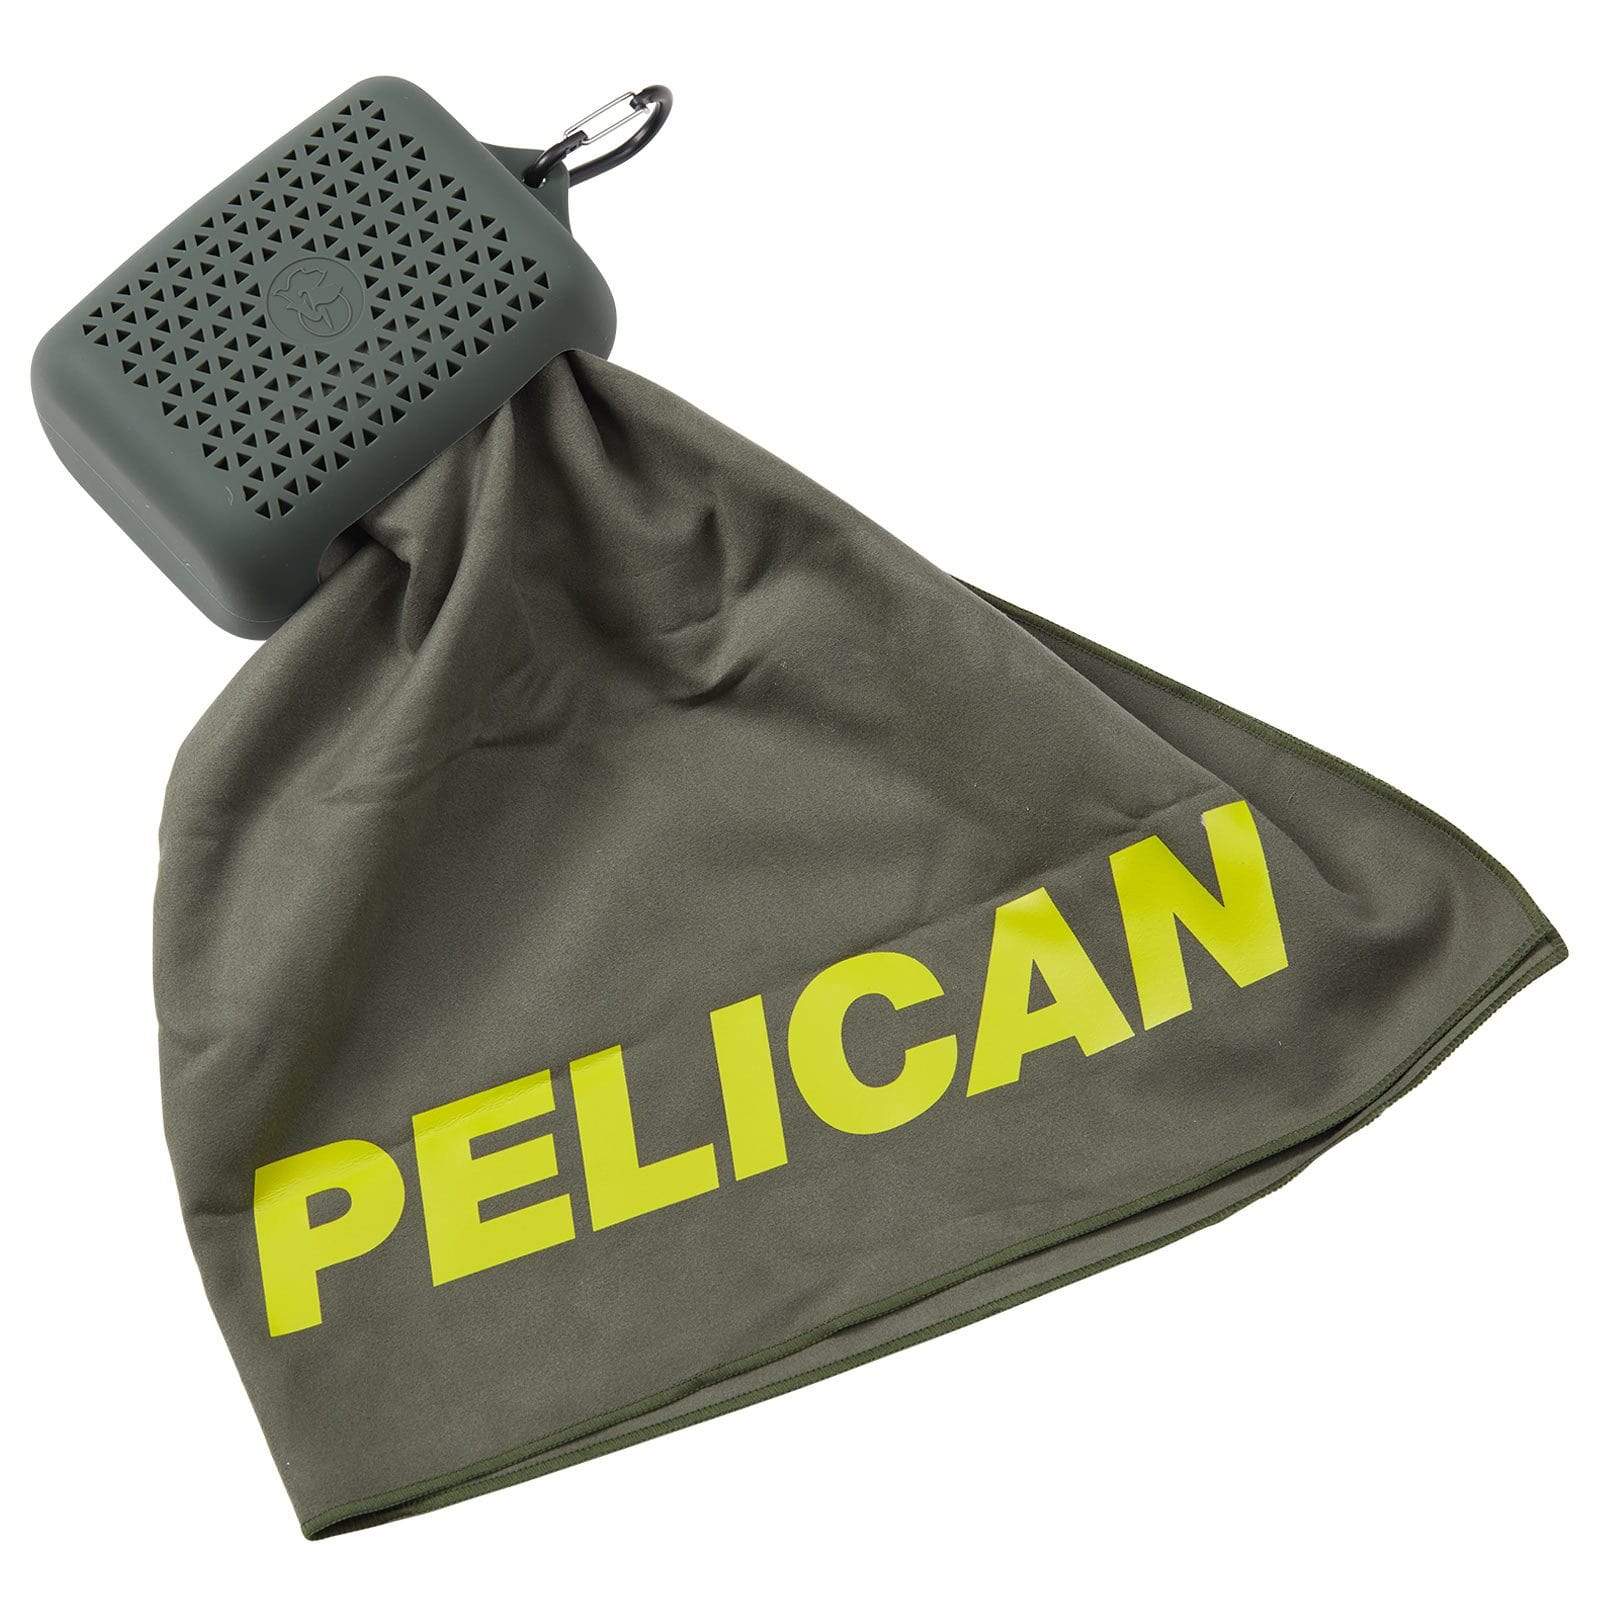 Pelican Multi Use Towel with Carry Case in Olive Drab